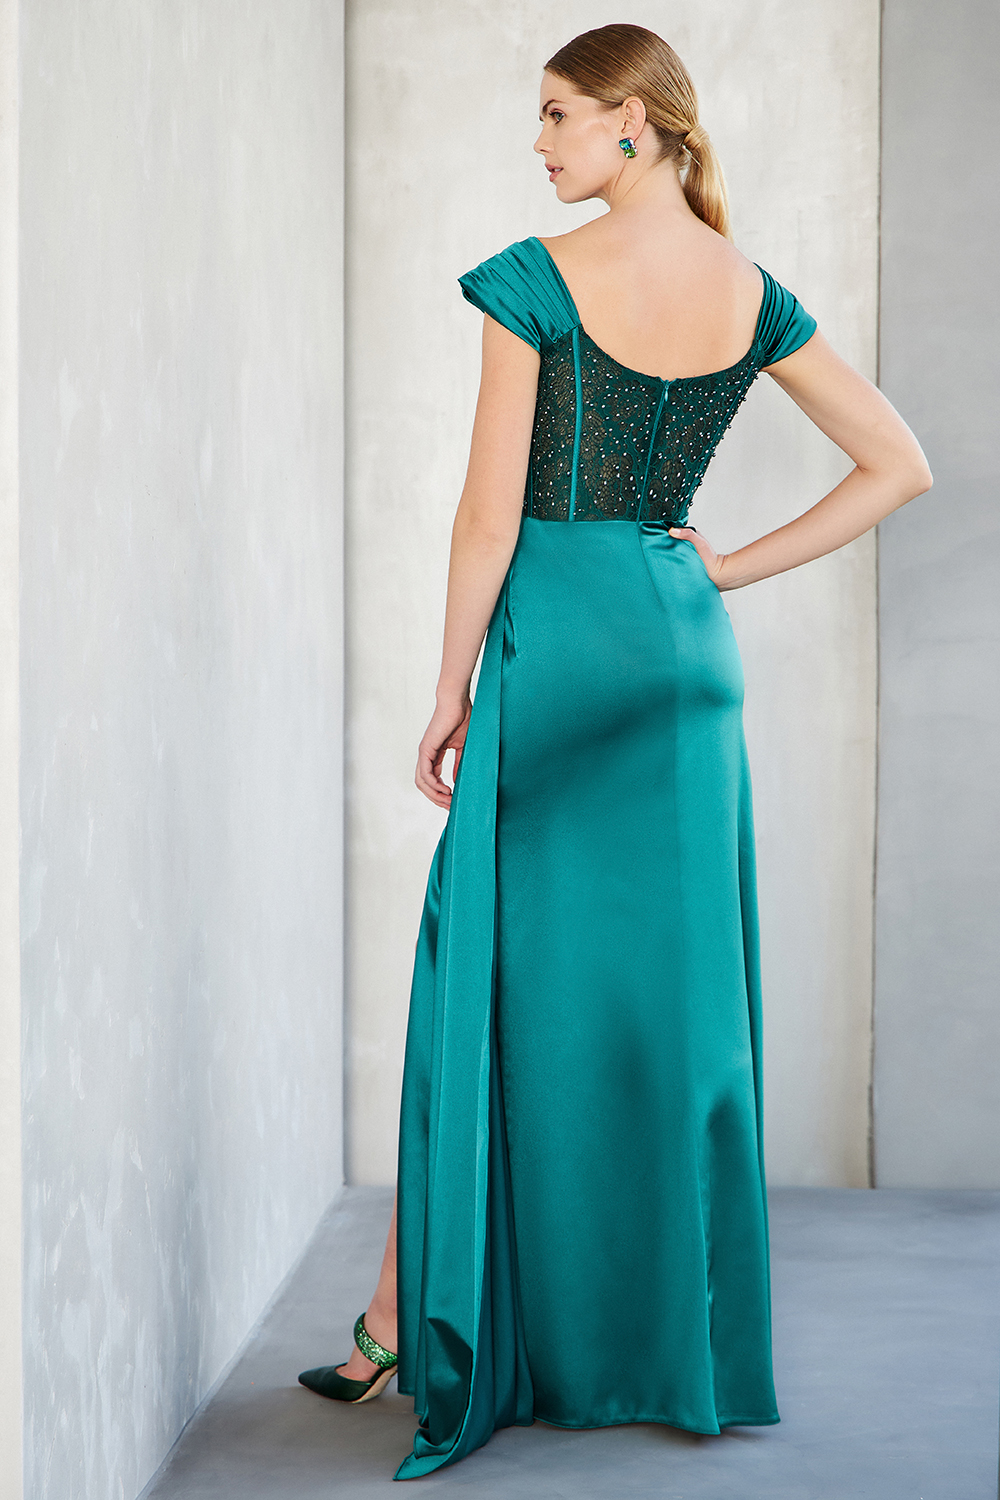 Long evening satin dress with lace at the top